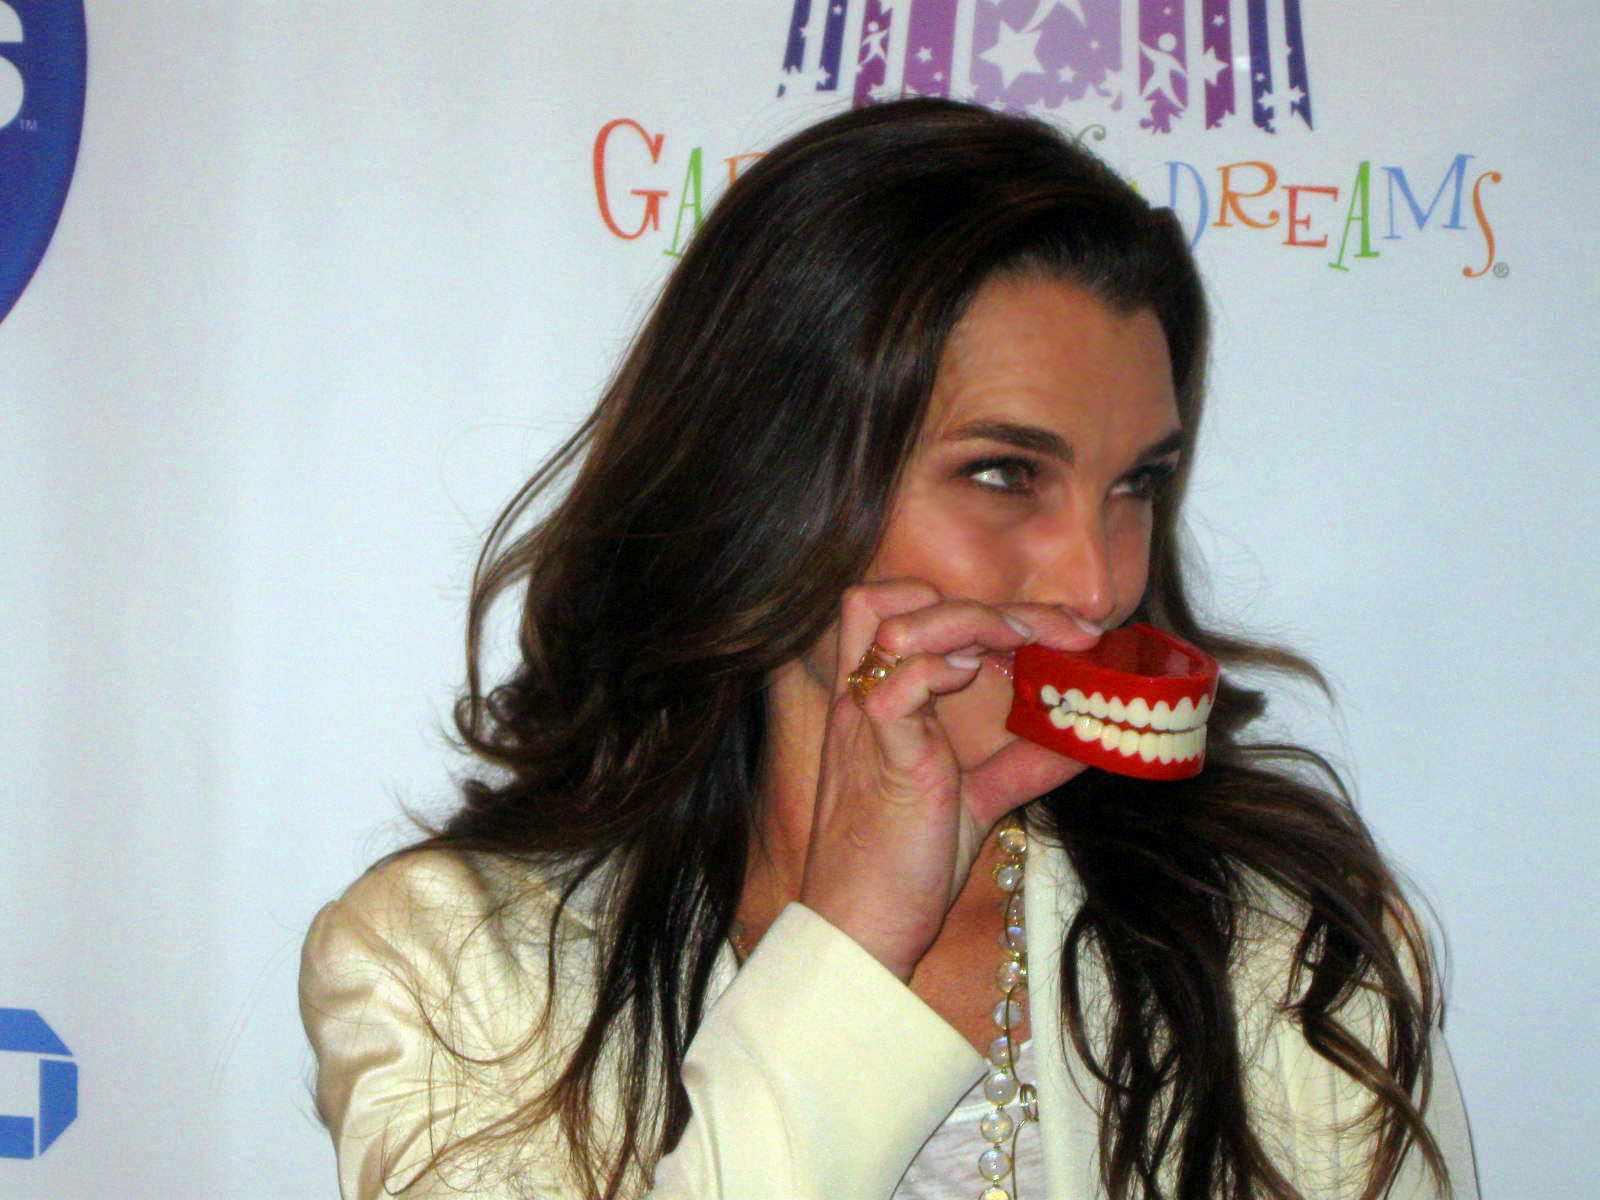 brookeshields - Garden of Dreams Bring Laughter, Hope & Inspiration to Children